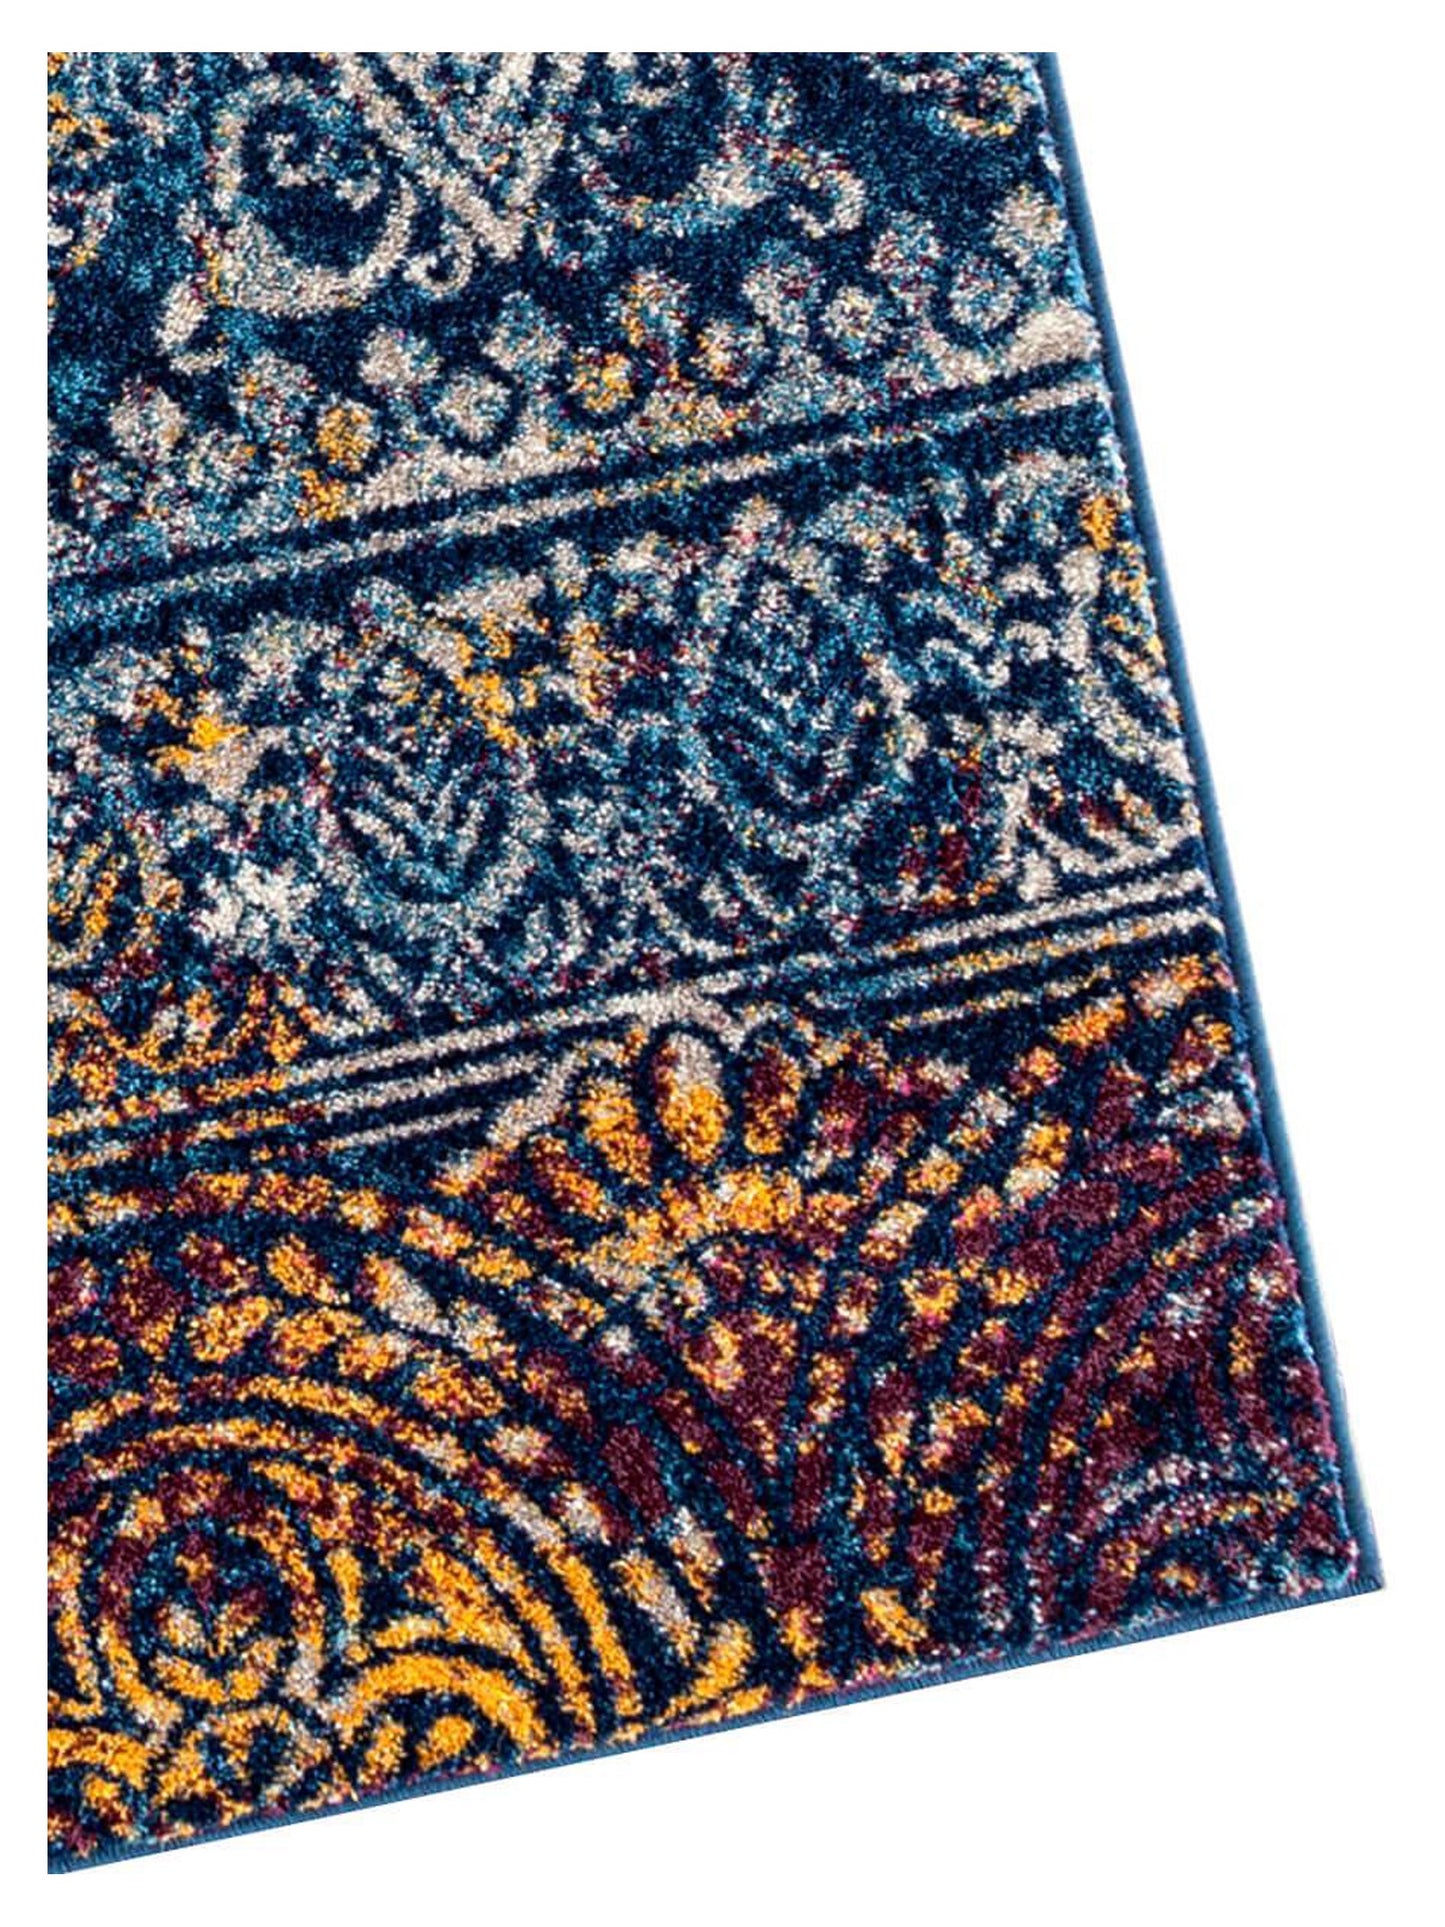 Limited Grace GE-359 TEAL BLUE  Transitional Machinemade Rug